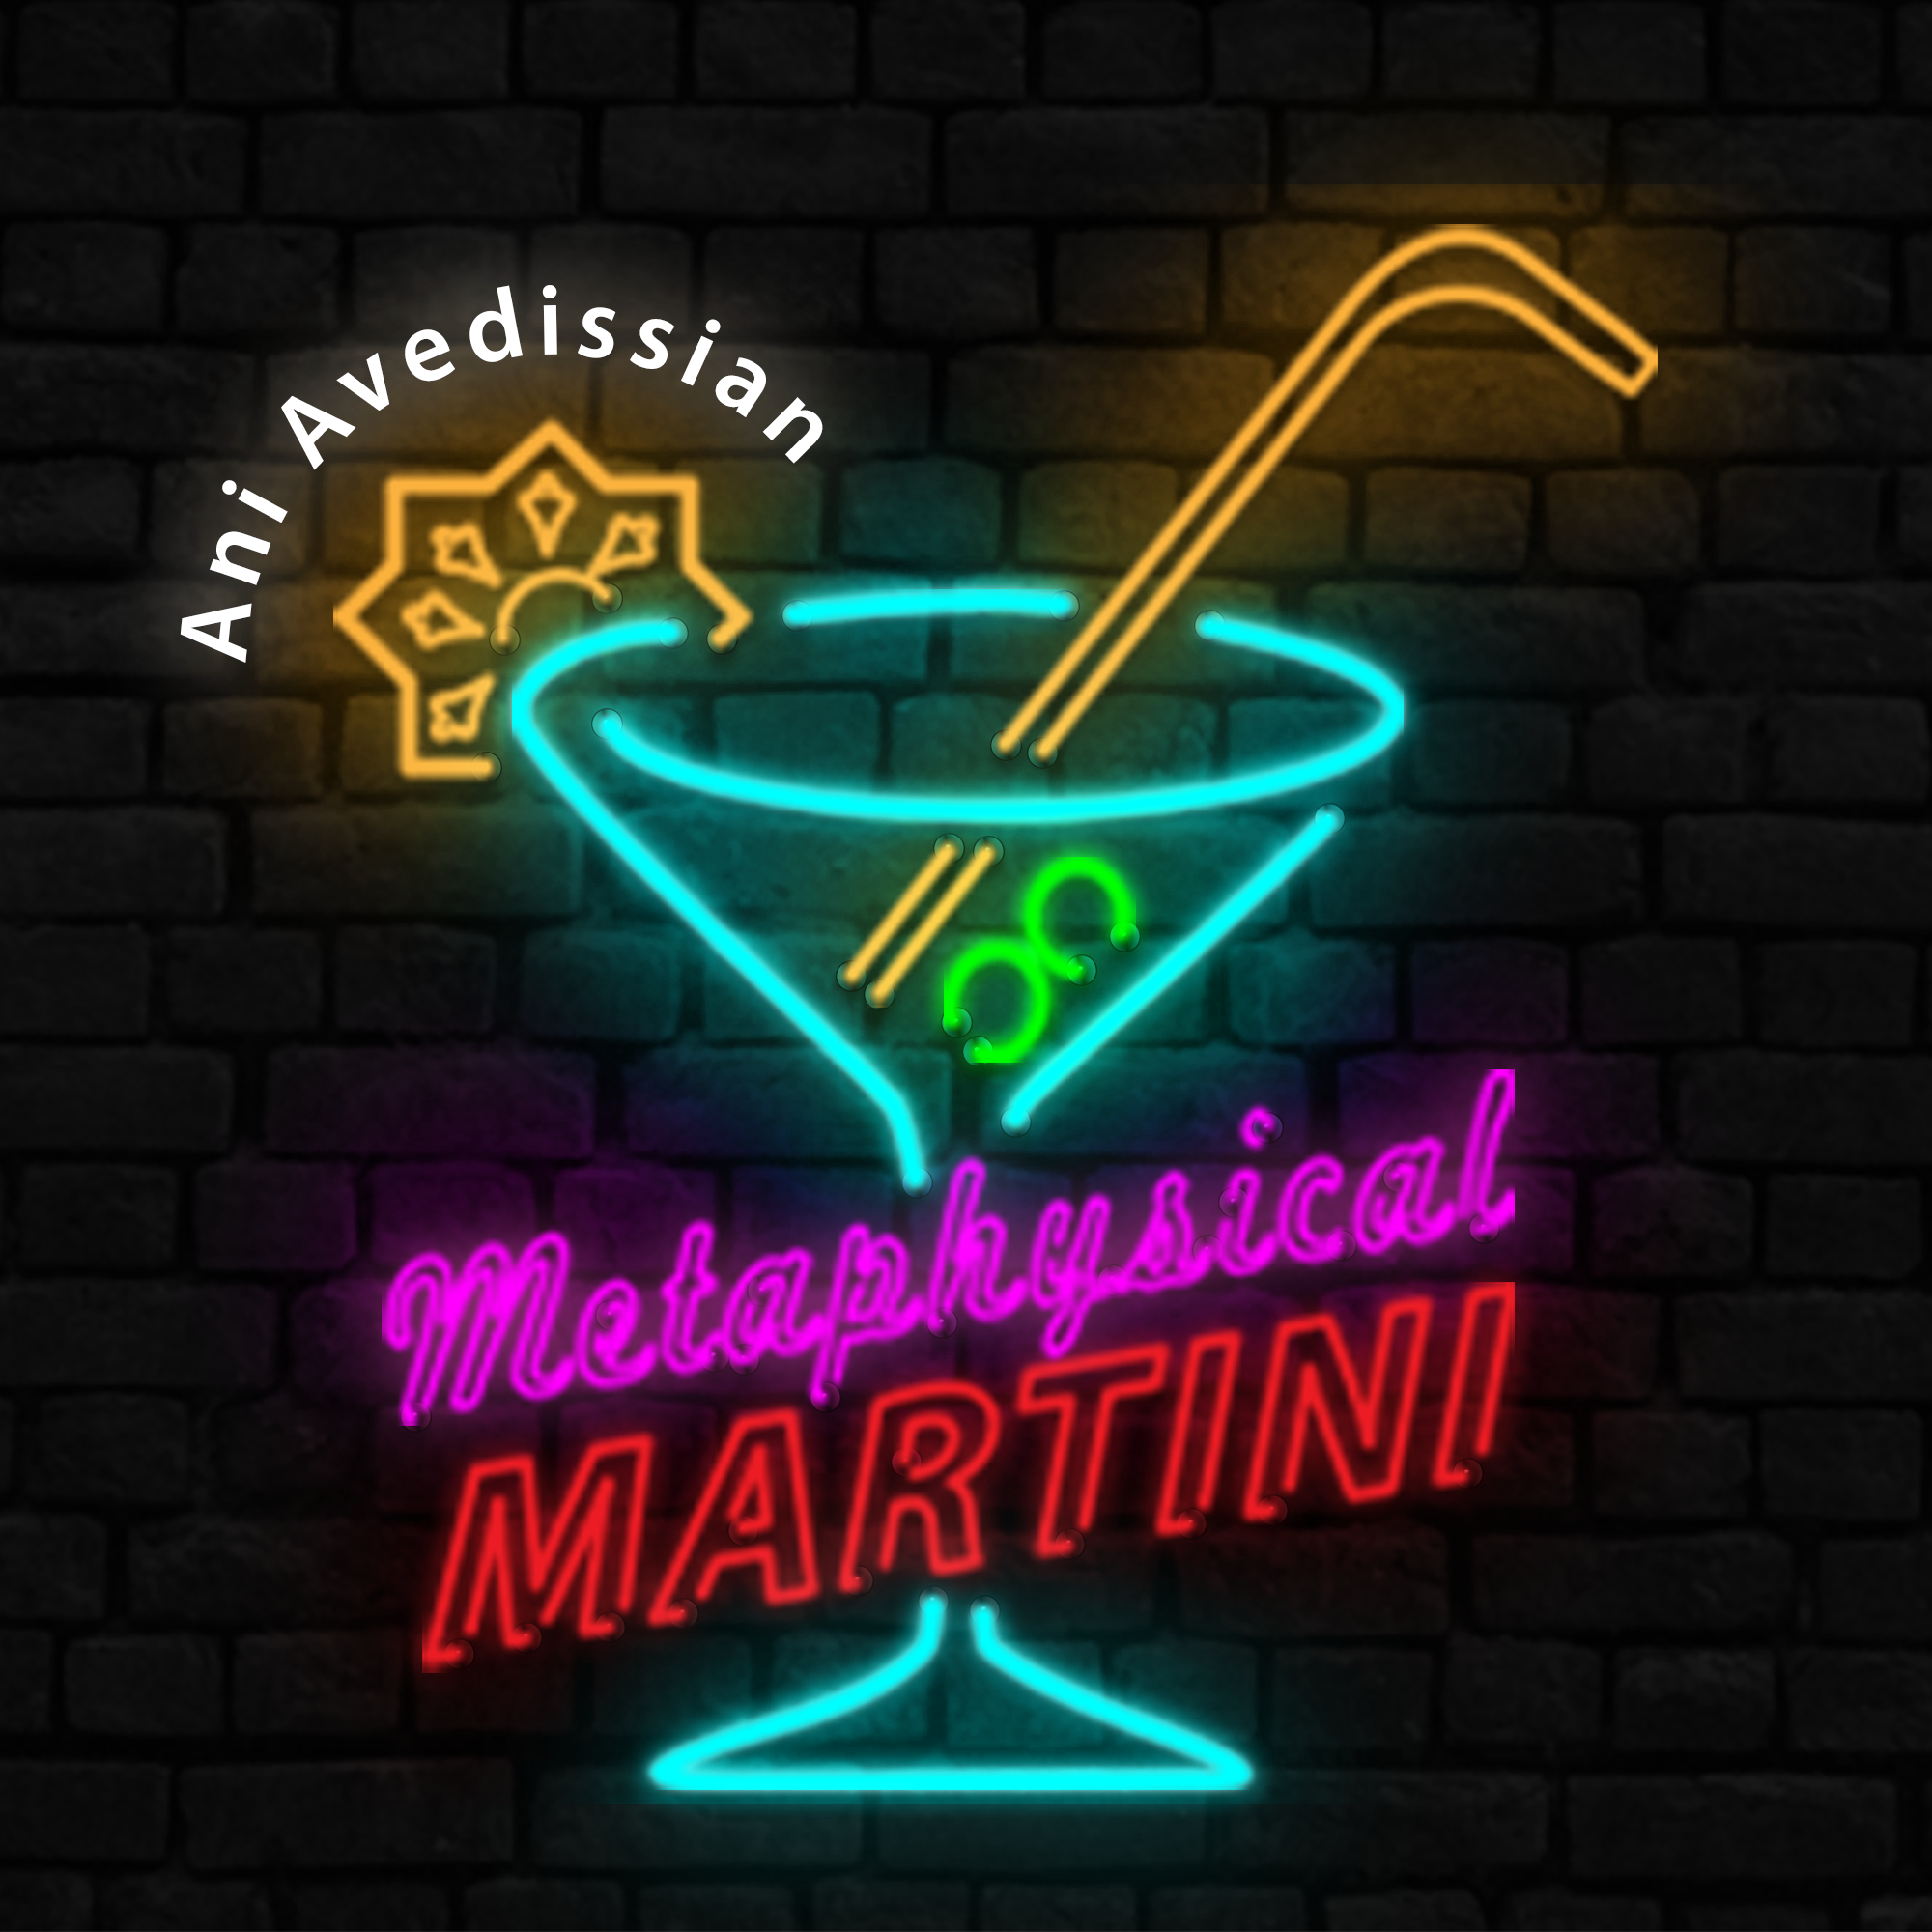 "Metaphysical Martini"  10/16/19  A return to common decency . . . and all the other usual stuff!